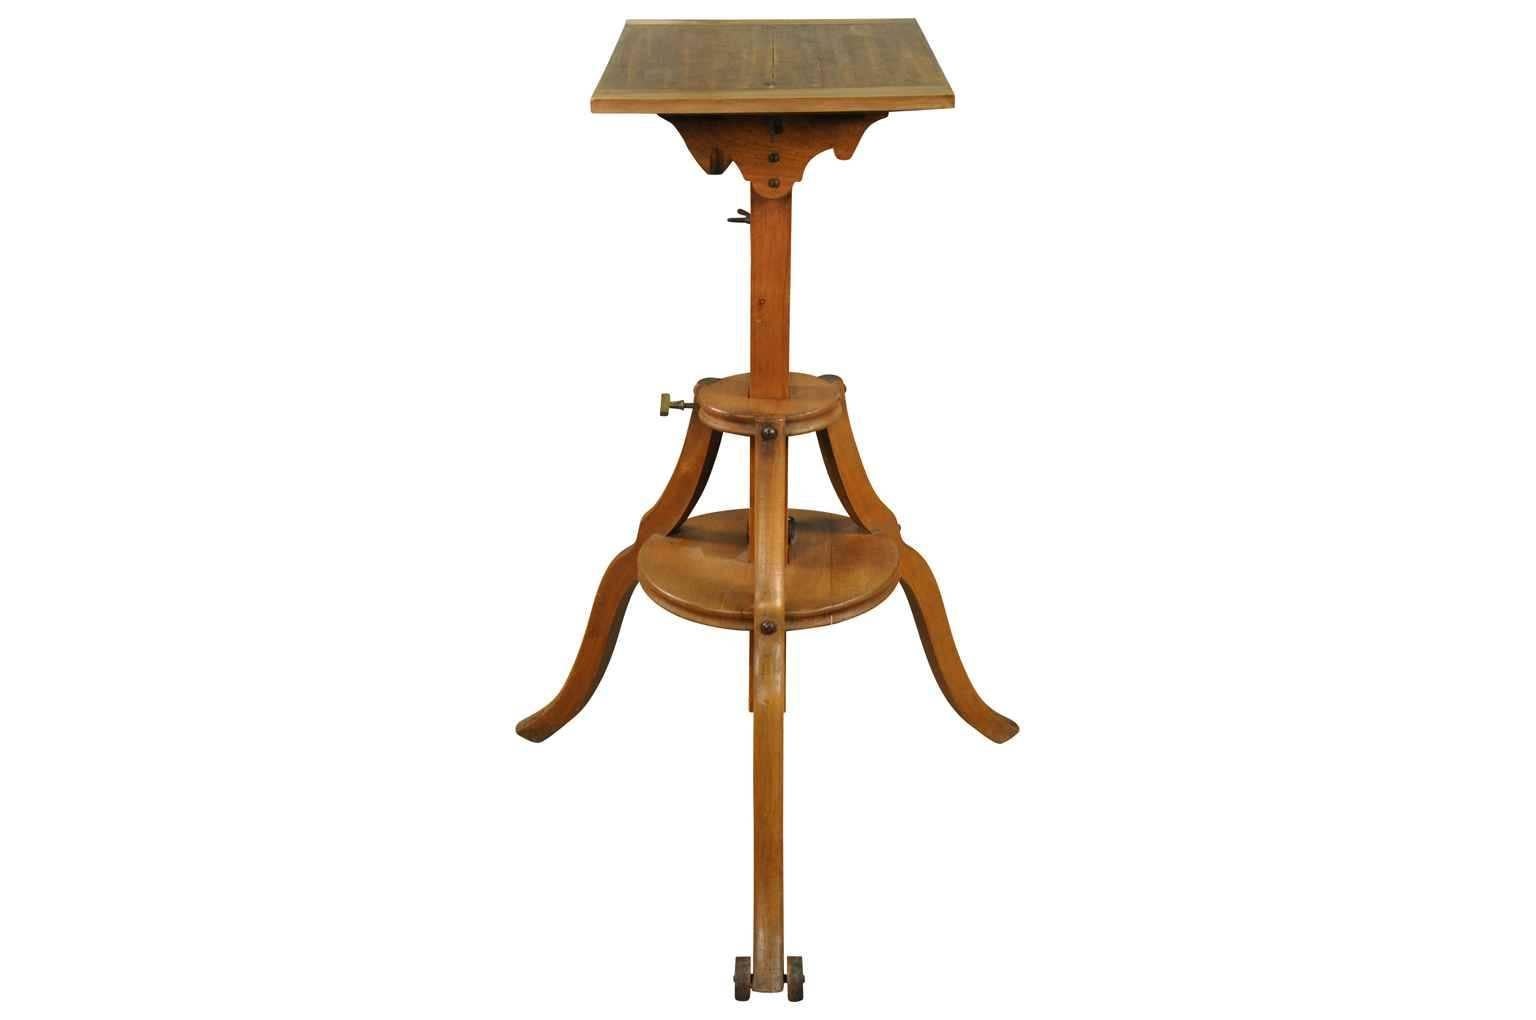 A mechanical selette or sculptor's stand in beechwood, 19th century. The work area raises and lowers. The work area also inclines and declines. The manufacturer's plaque reads - BONNE PRESSE 5, Rue Bayard et 22, Cours - La - Reine paris. The height